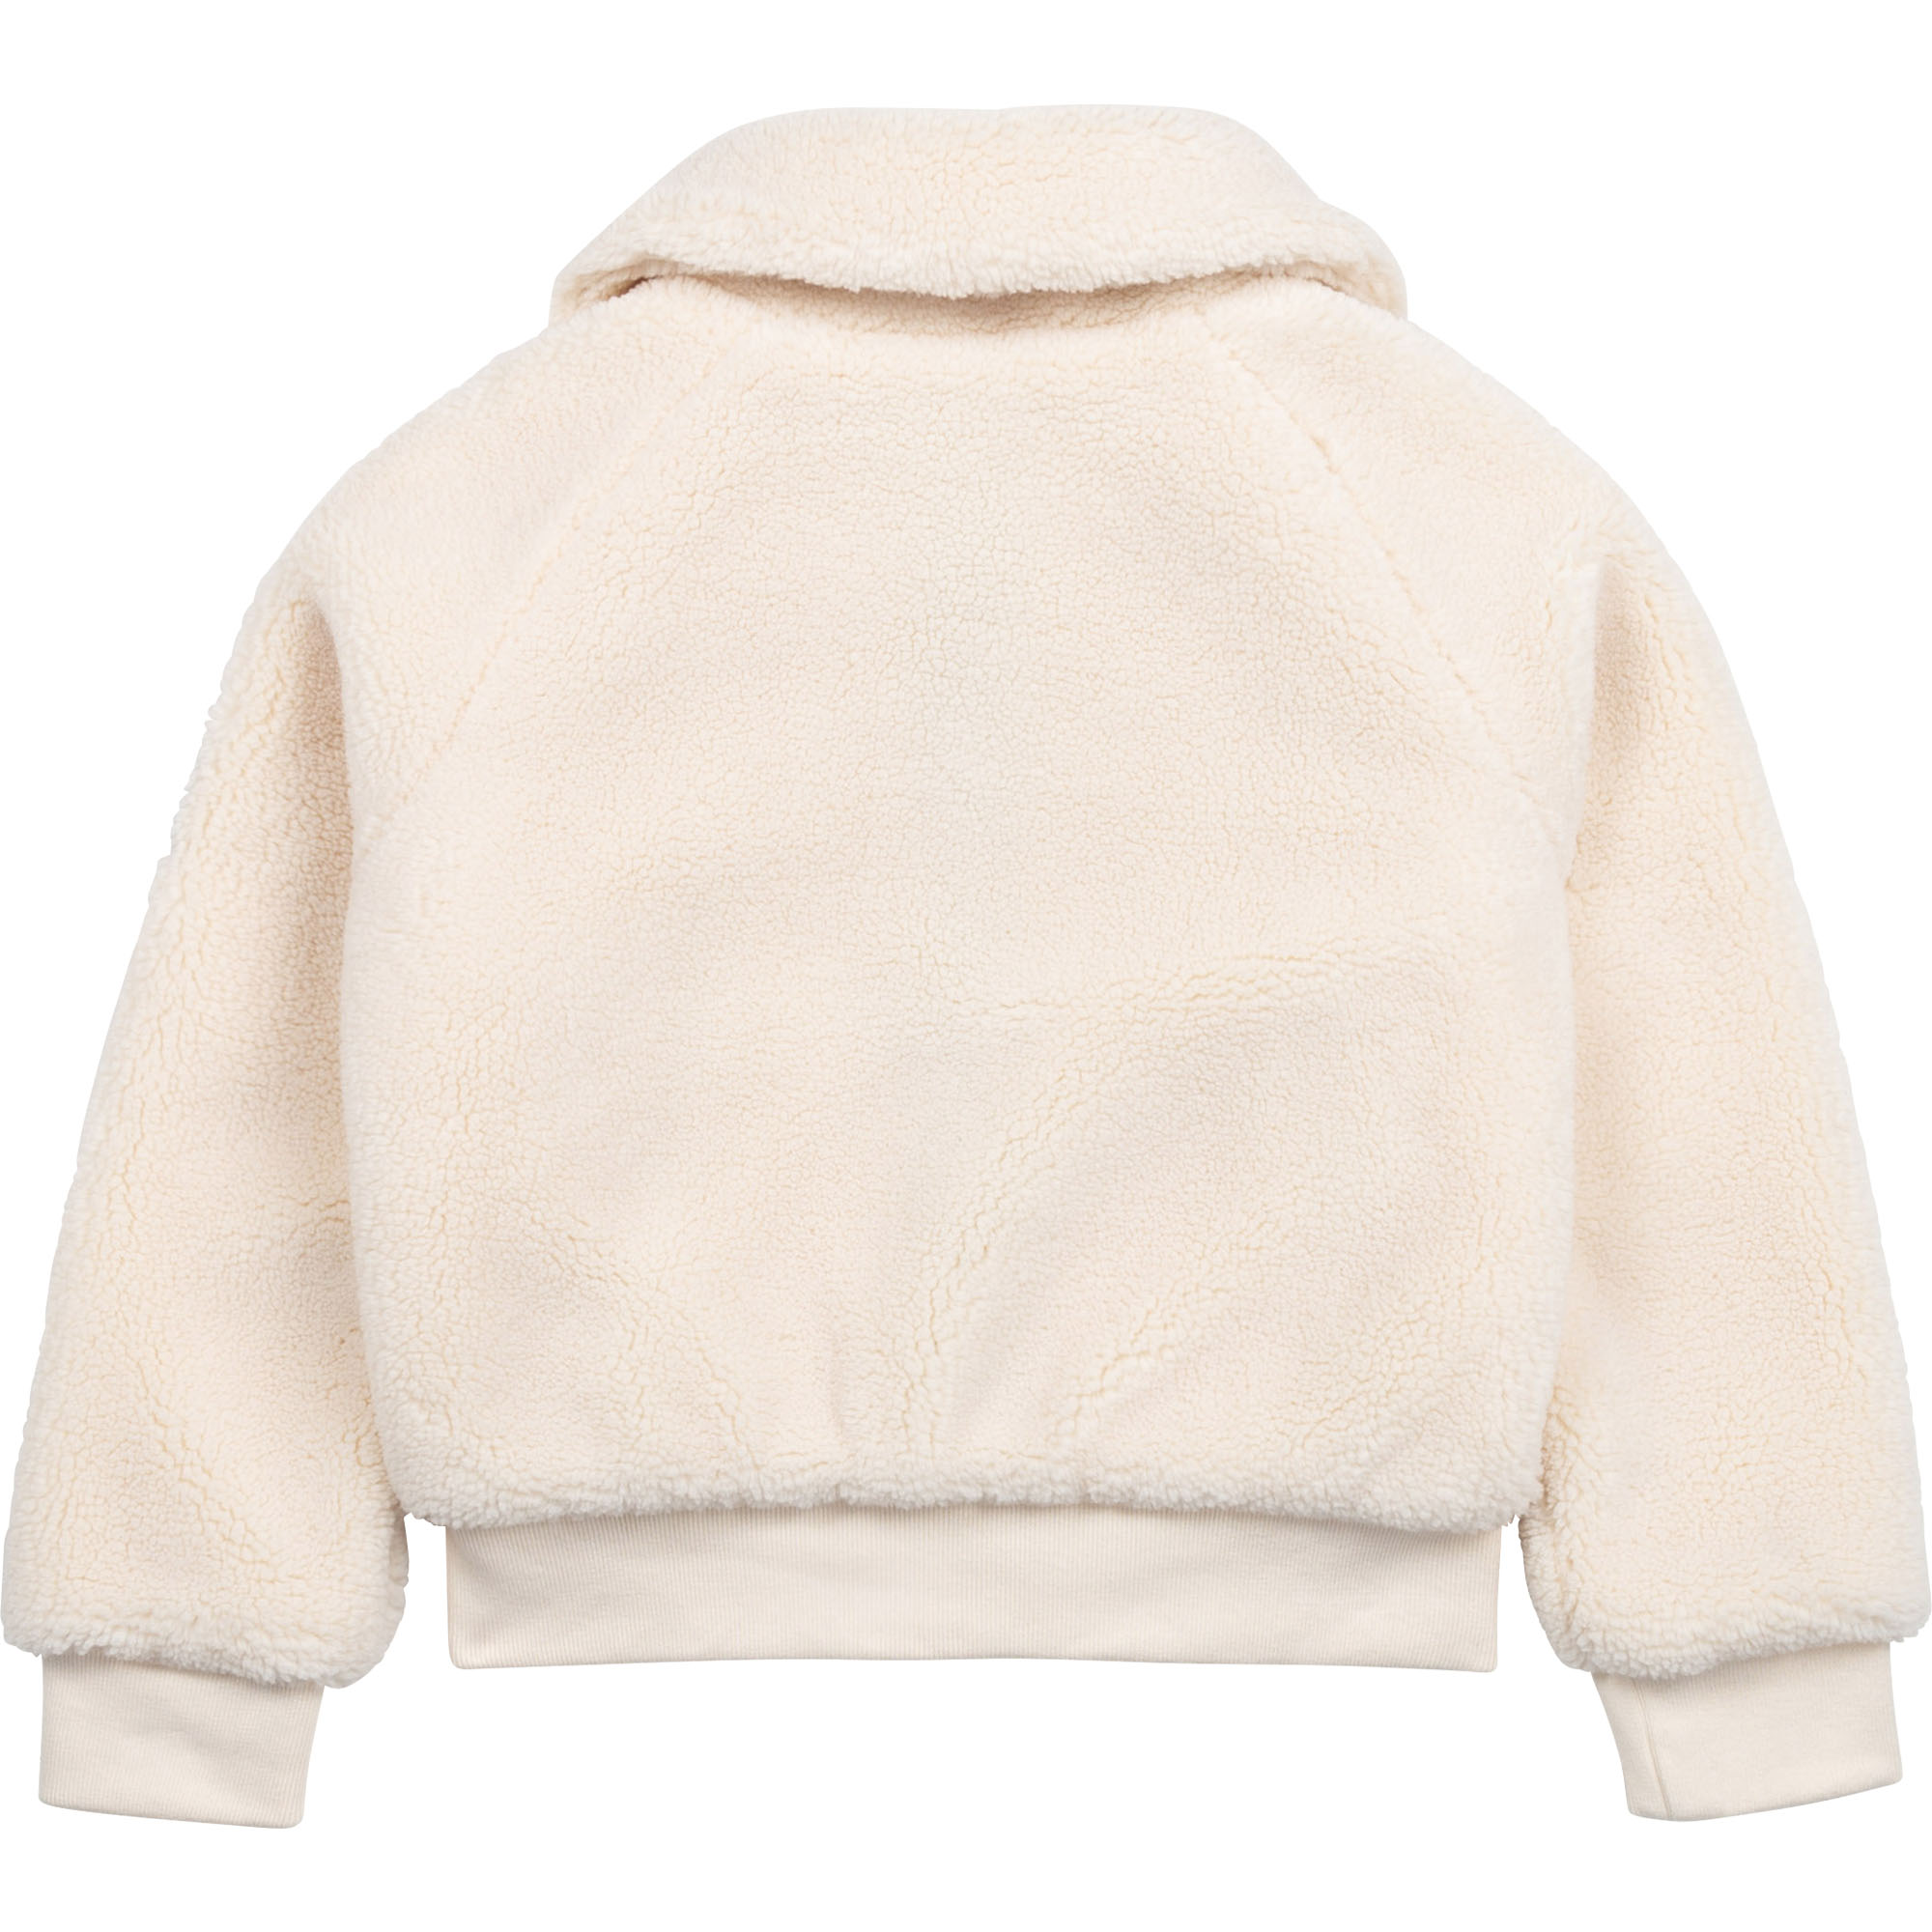 Lined sherpa cardigan AIGLE for GIRL